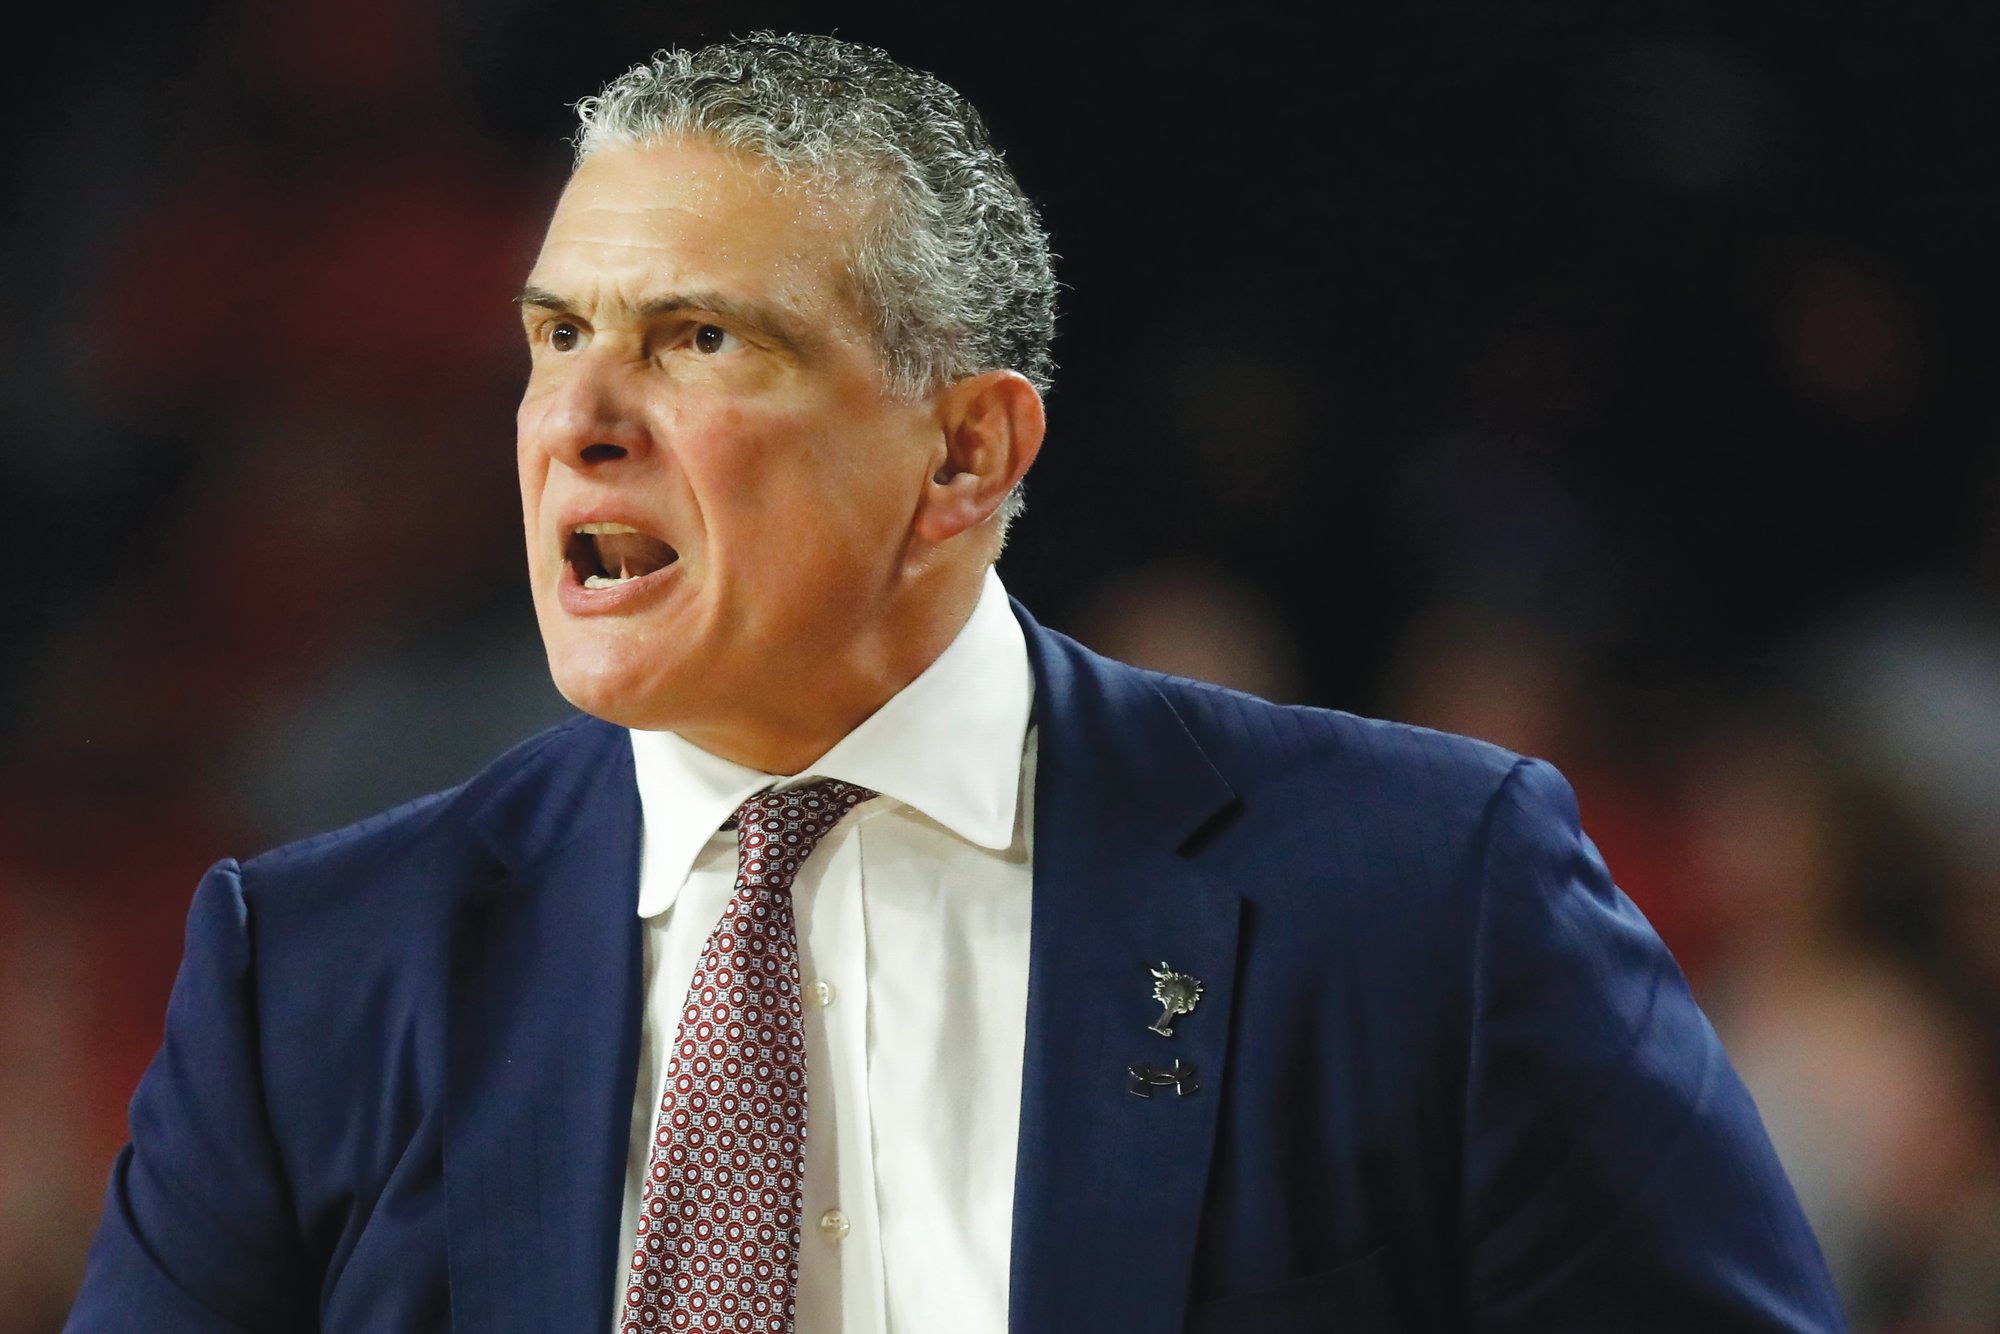 South Carolina coach Frank Martin reacts during the team's NCAA college basketball game against Georgia on Wednesday, Feb. 12, 2020, in Athens, Ga.